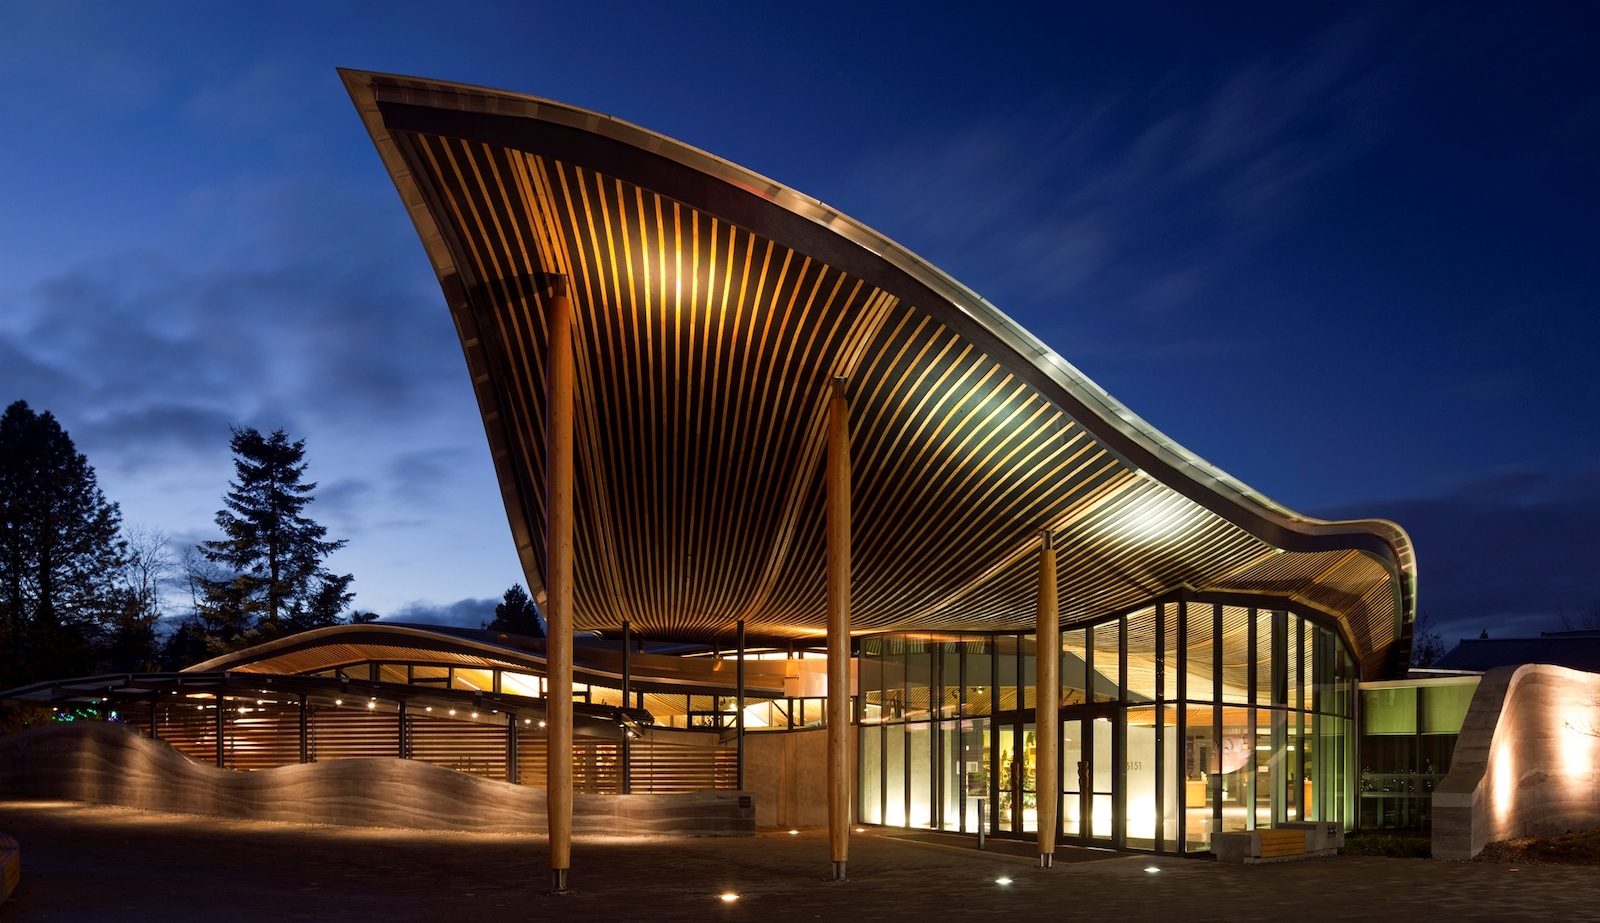 A visitors pavilion with a wooden roof that curves elegantly.